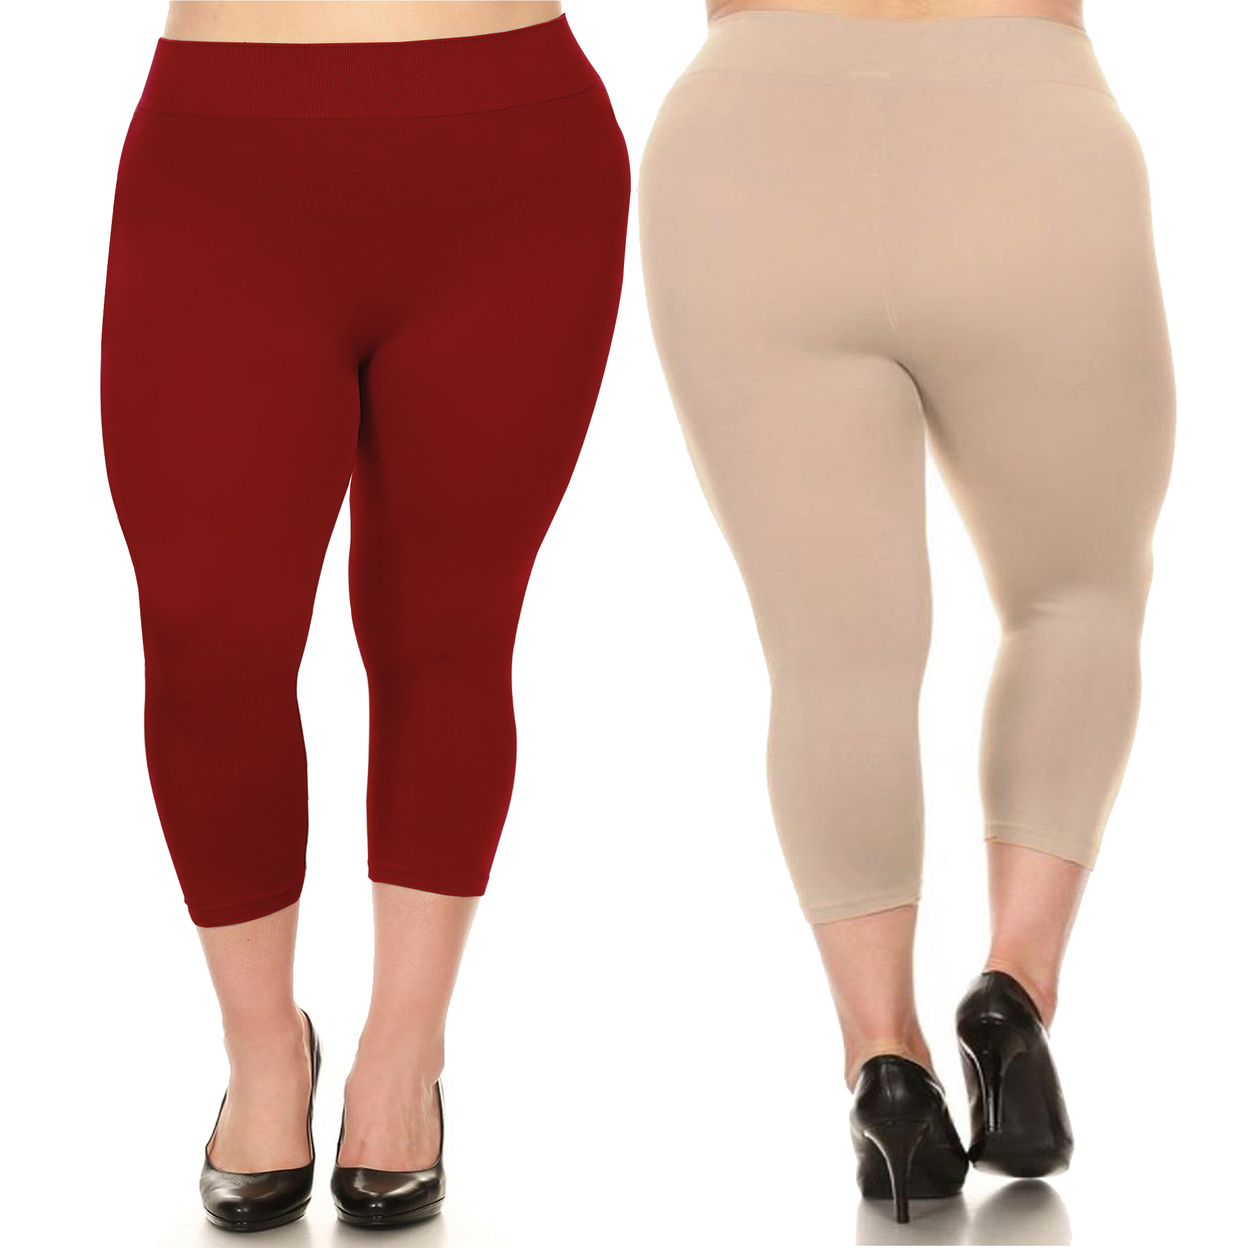 2-Pack: Women's Ultra-Soft High Waisted Smooth Stretch Active Yoga Capri Leggings Plus Size Available - Beige & Red, 2x